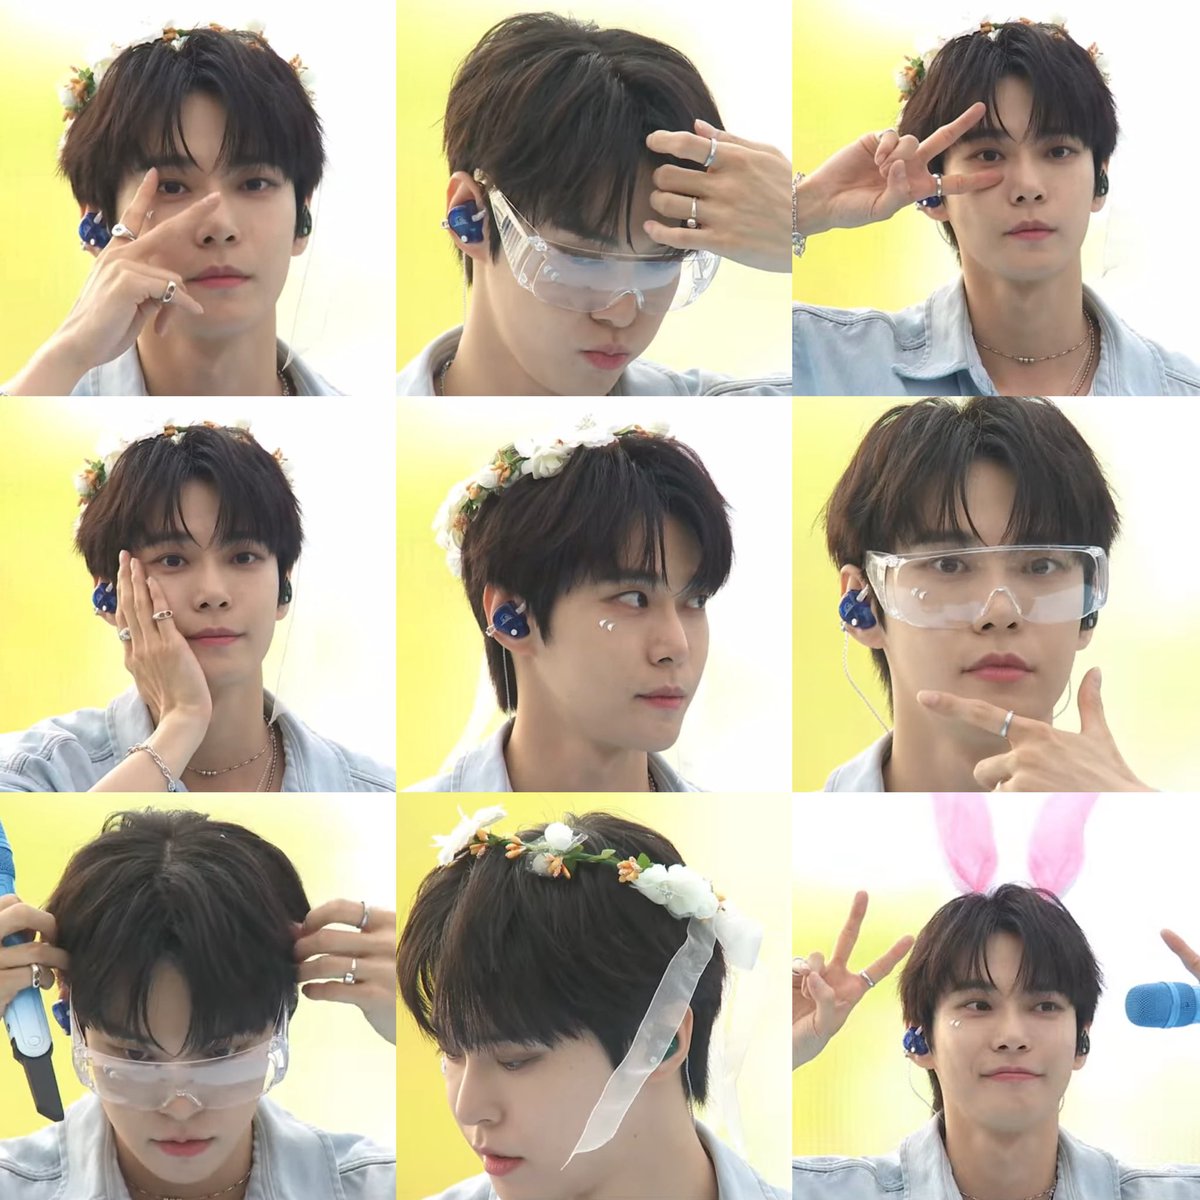 doyoung capture time 🌺 🐰 🤓